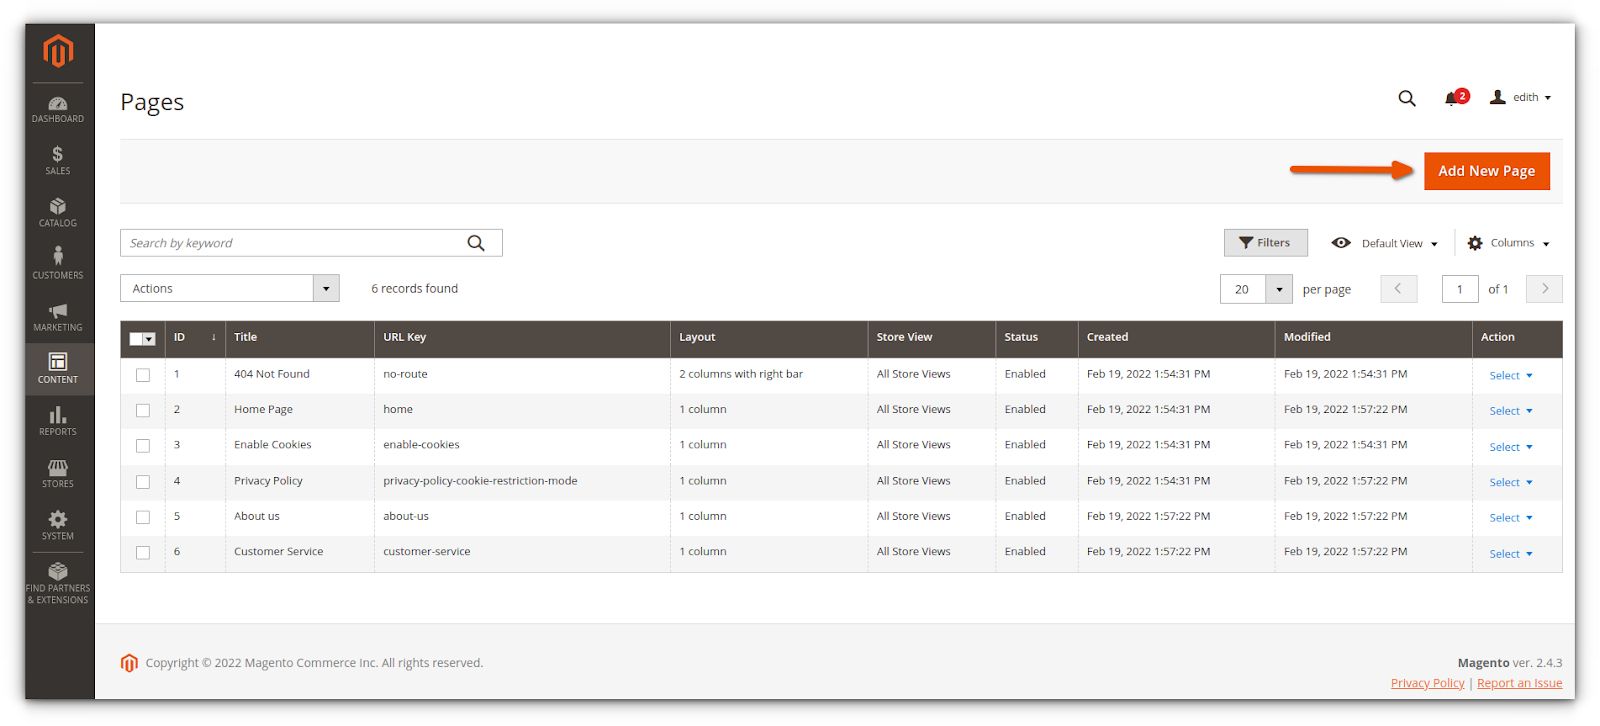 Under Pages, click the Add New Page button (top-right corner of the Magento Admin Panel).